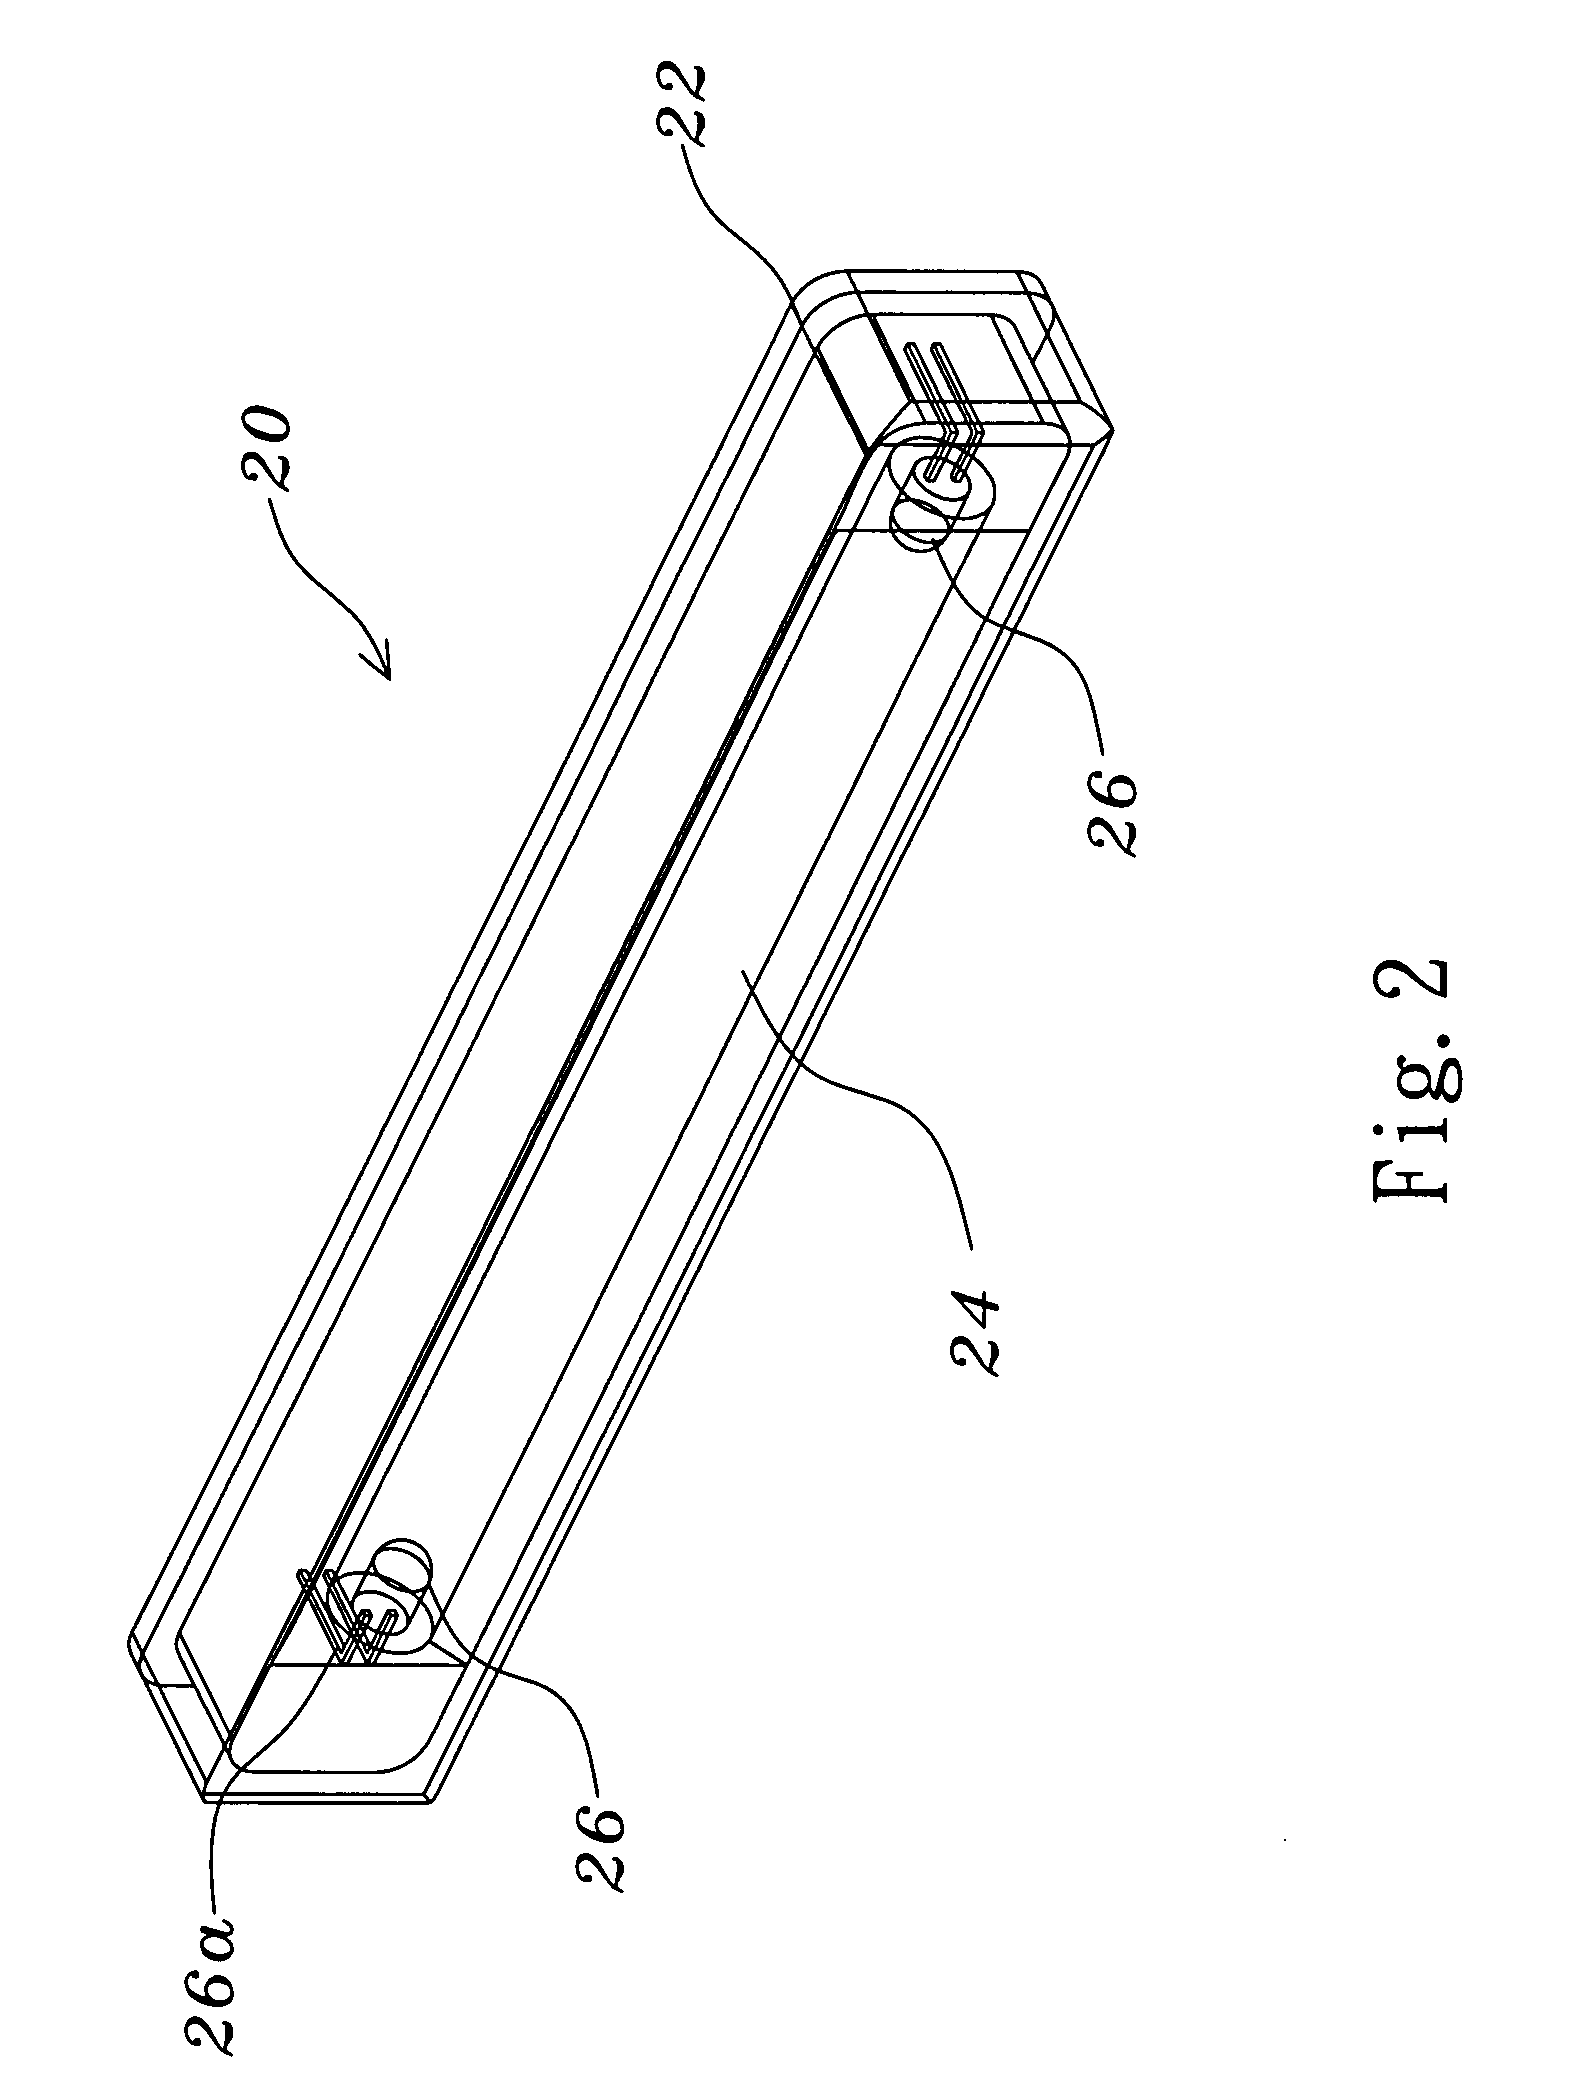 Structure for a center high mounted stop lamp